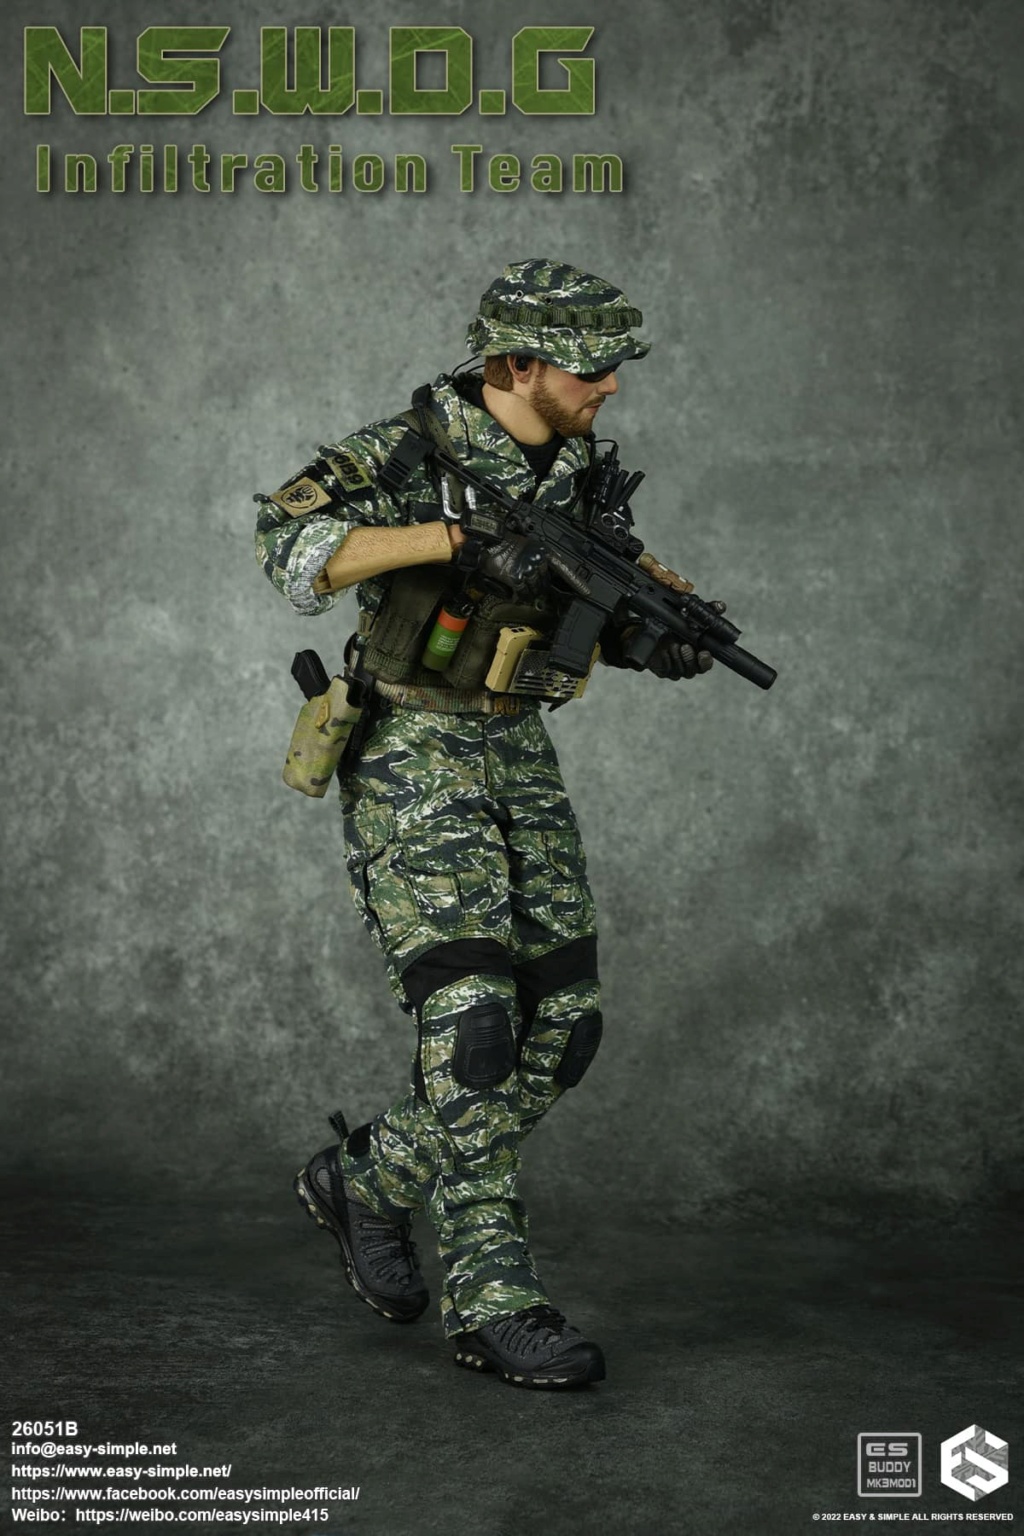 NSWDG - NEW PRODUCT: EASY AND SIMPLE 1/6 SCALE FIGURE: N.S.W.D.G INFILTRATION TEAM - (2 Versions) 9554